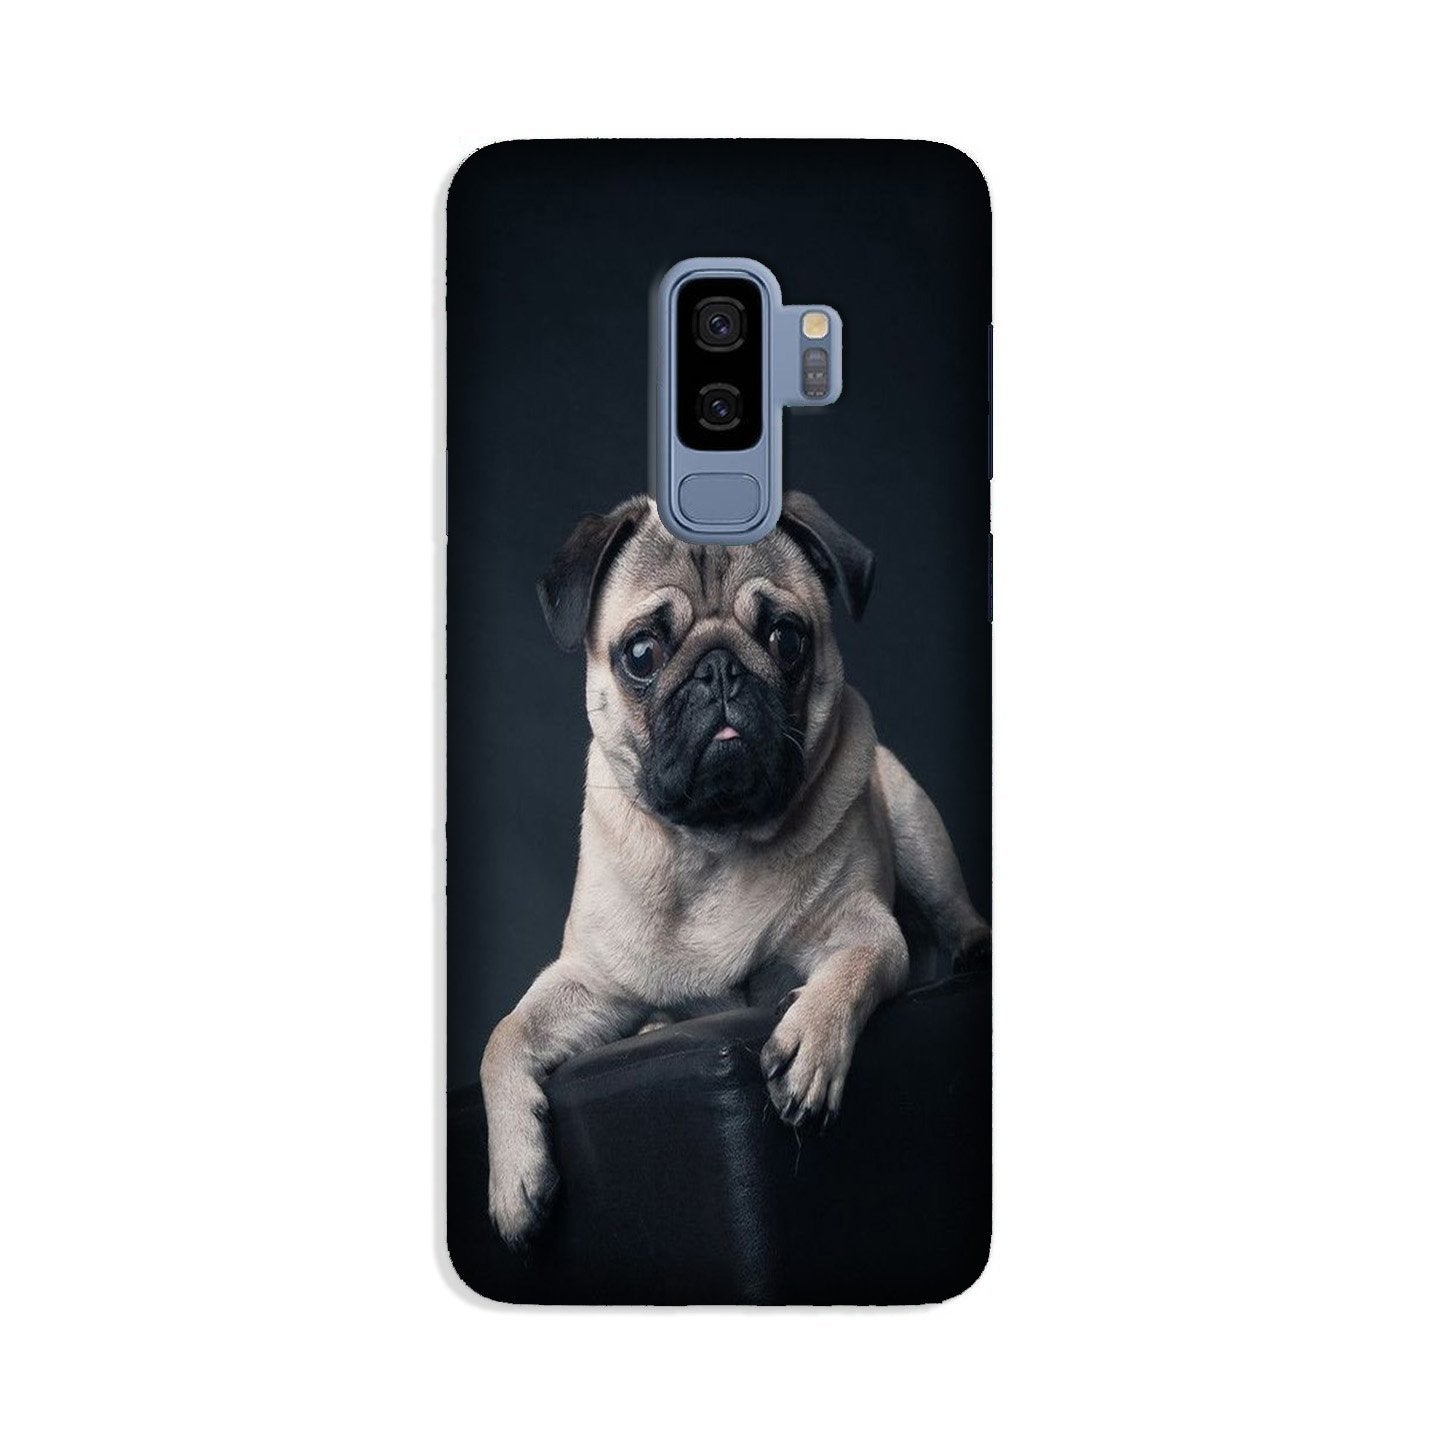 little Puppy Case for Galaxy S9 Plus